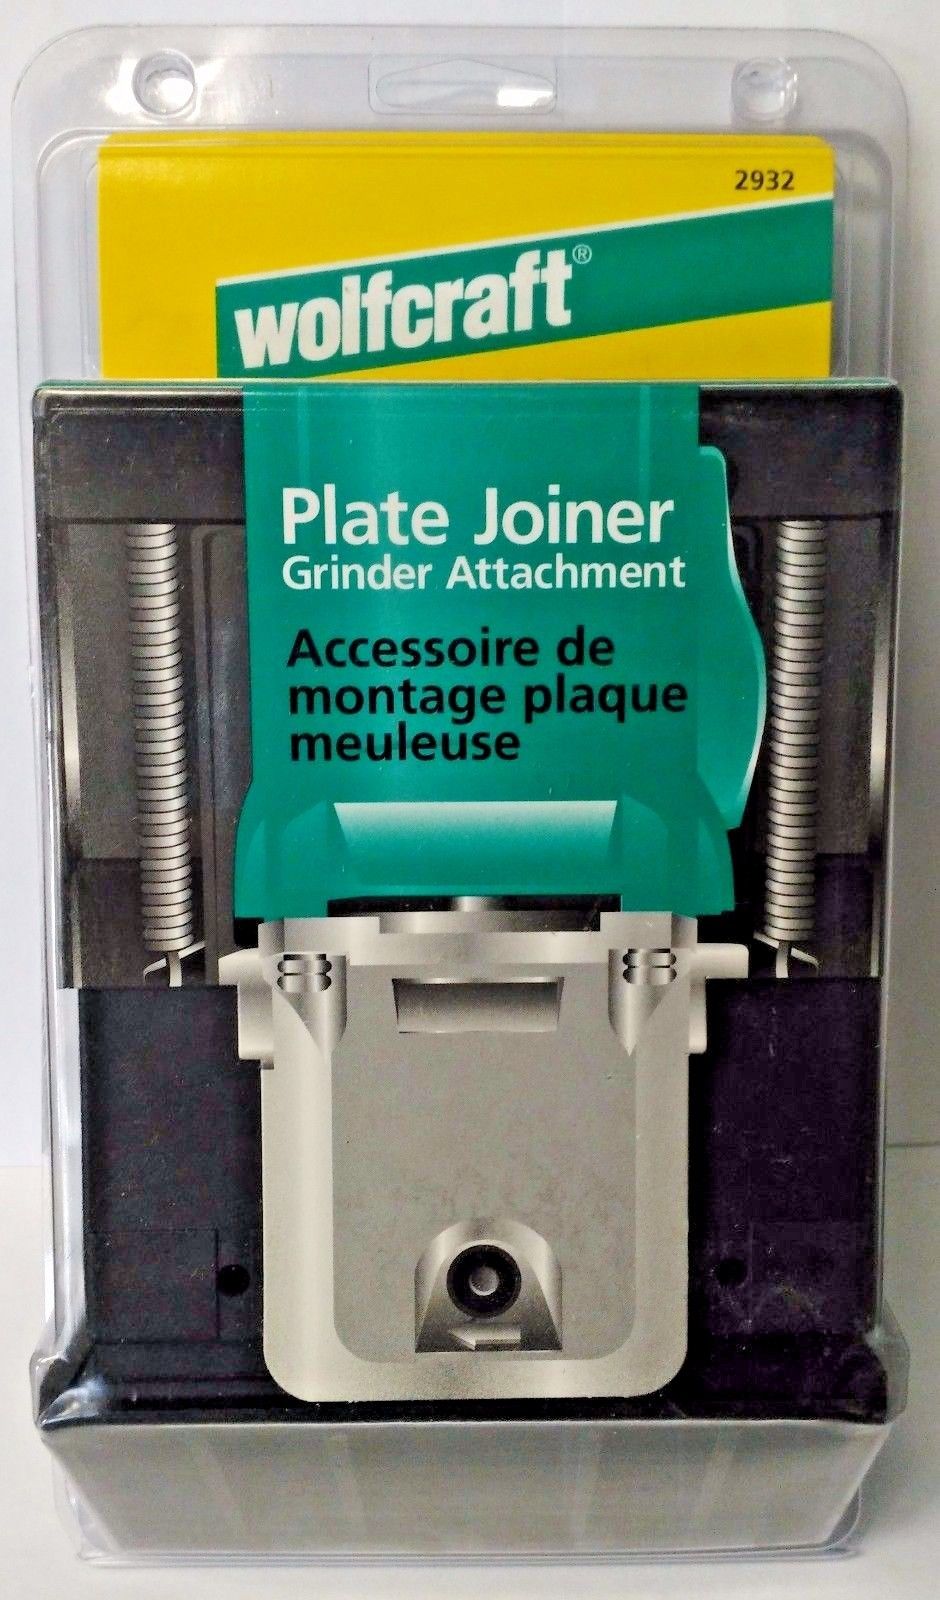 Wolfcraft 2932 Plate Joiner Grinder Attachment Germany